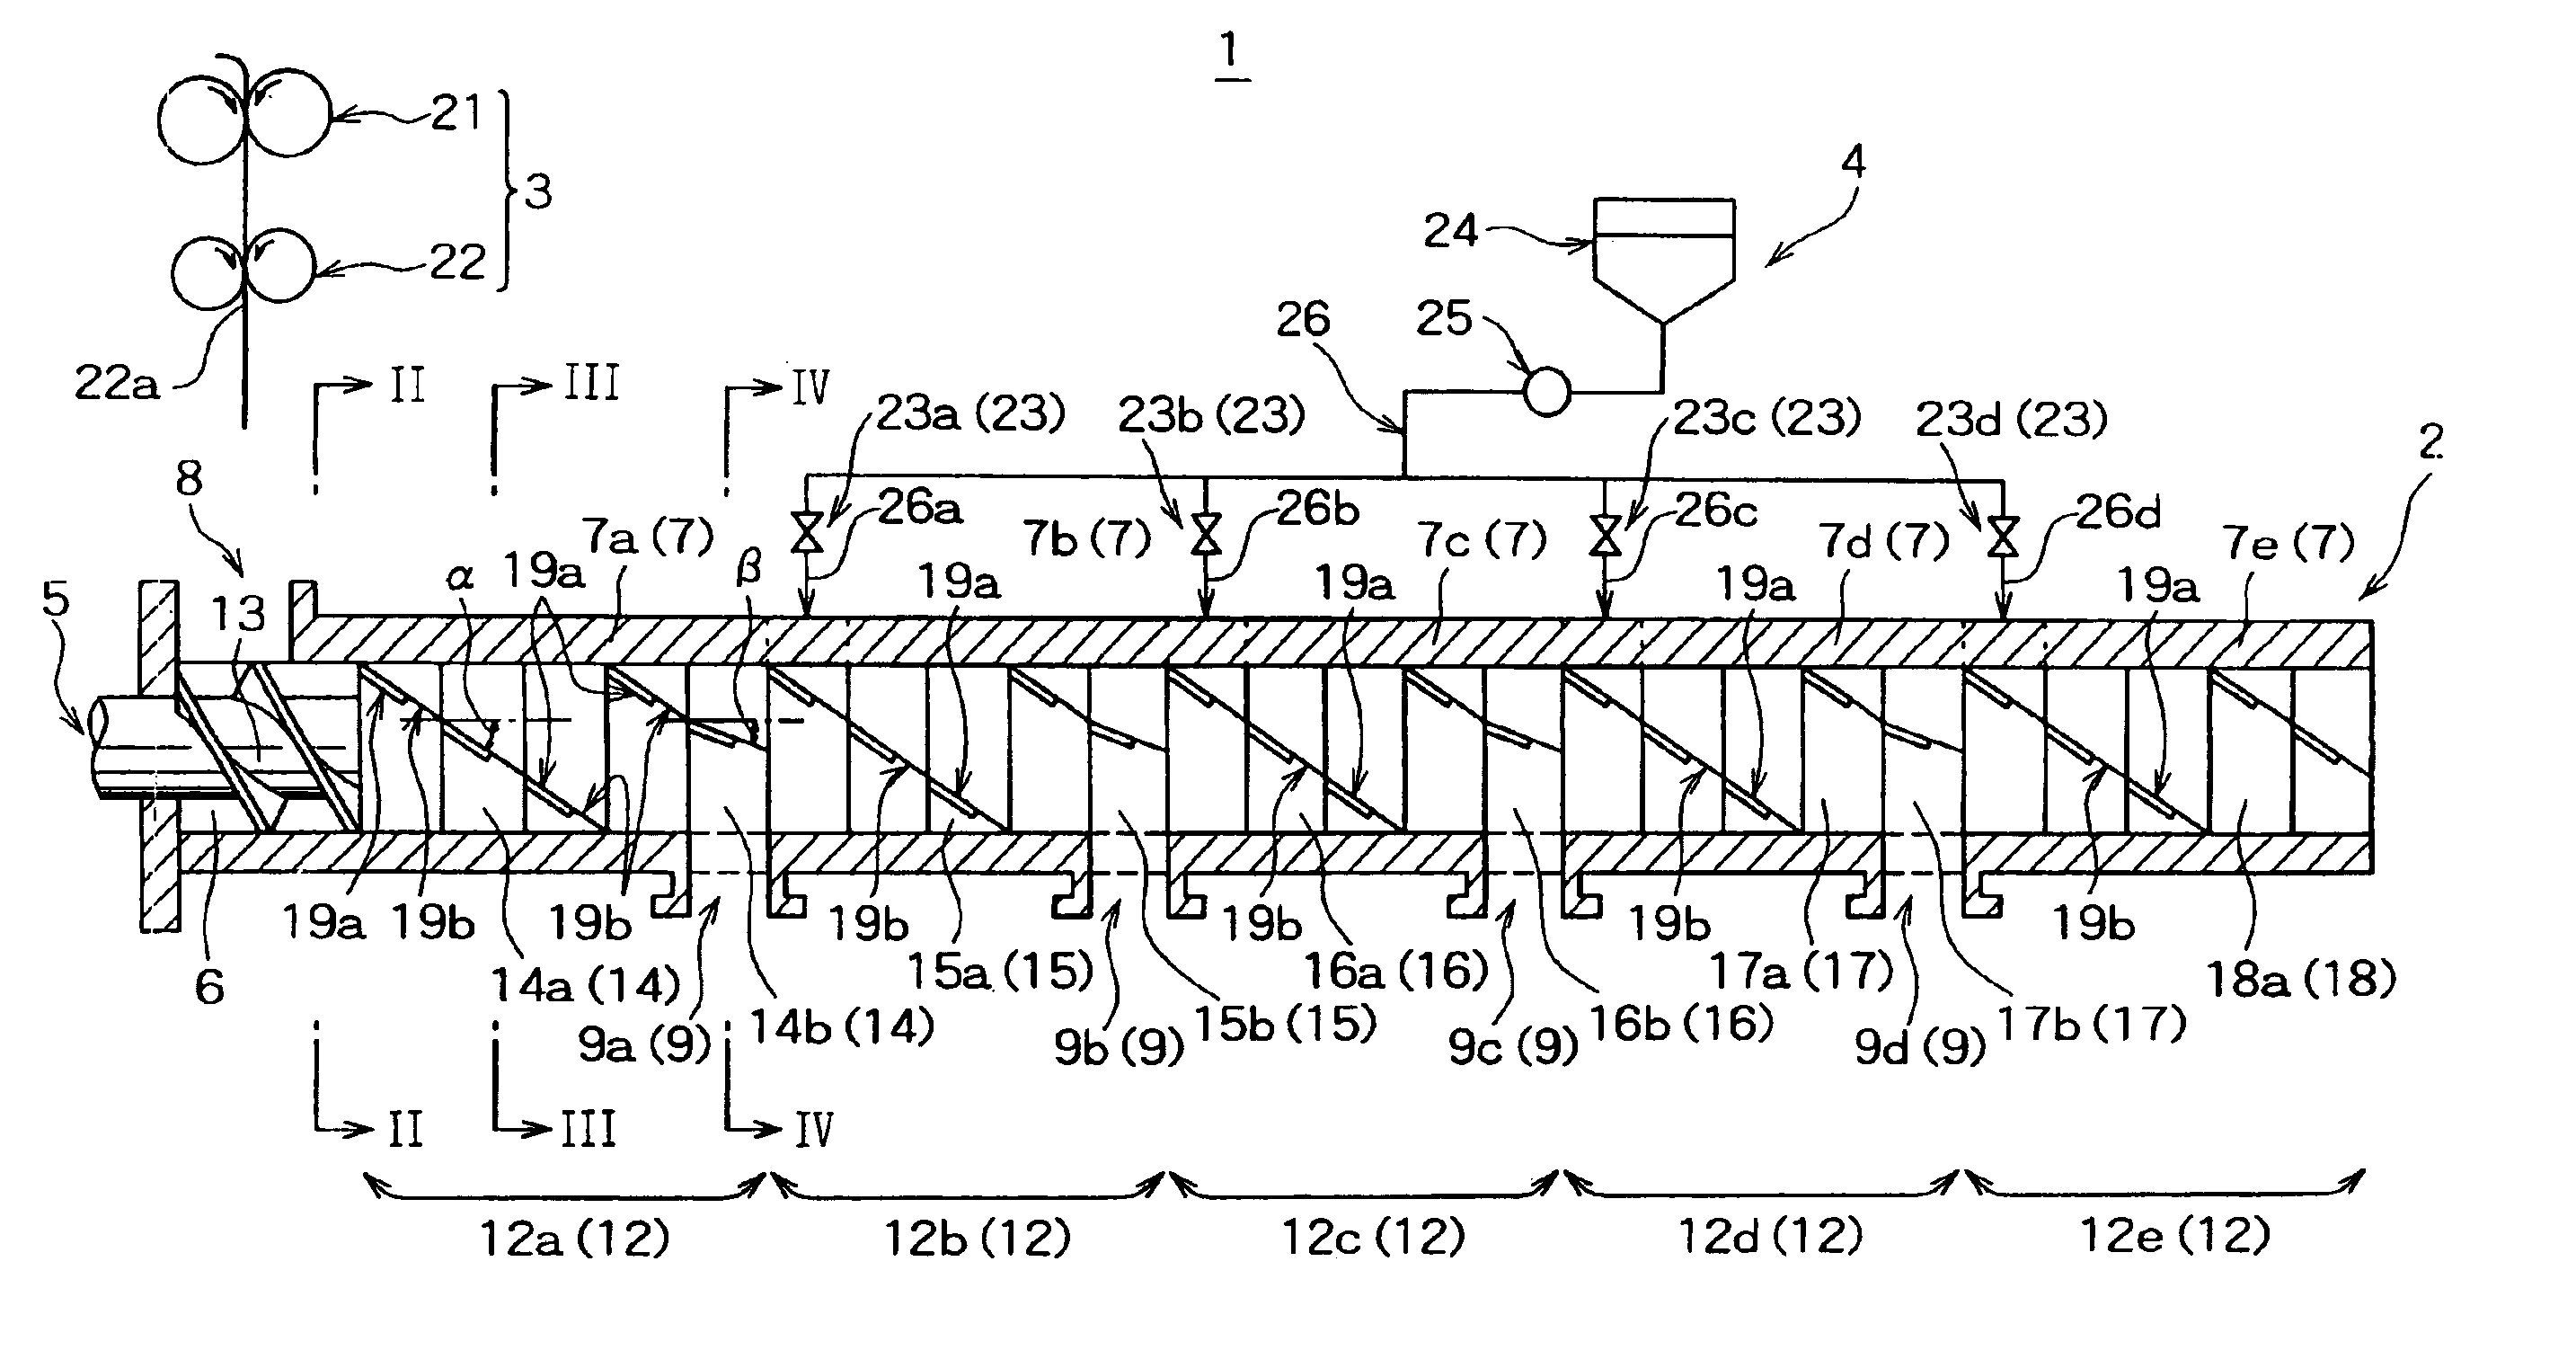 Kneading apparatus, including selectable discharge ports, for kneading rubber or rubber compositions